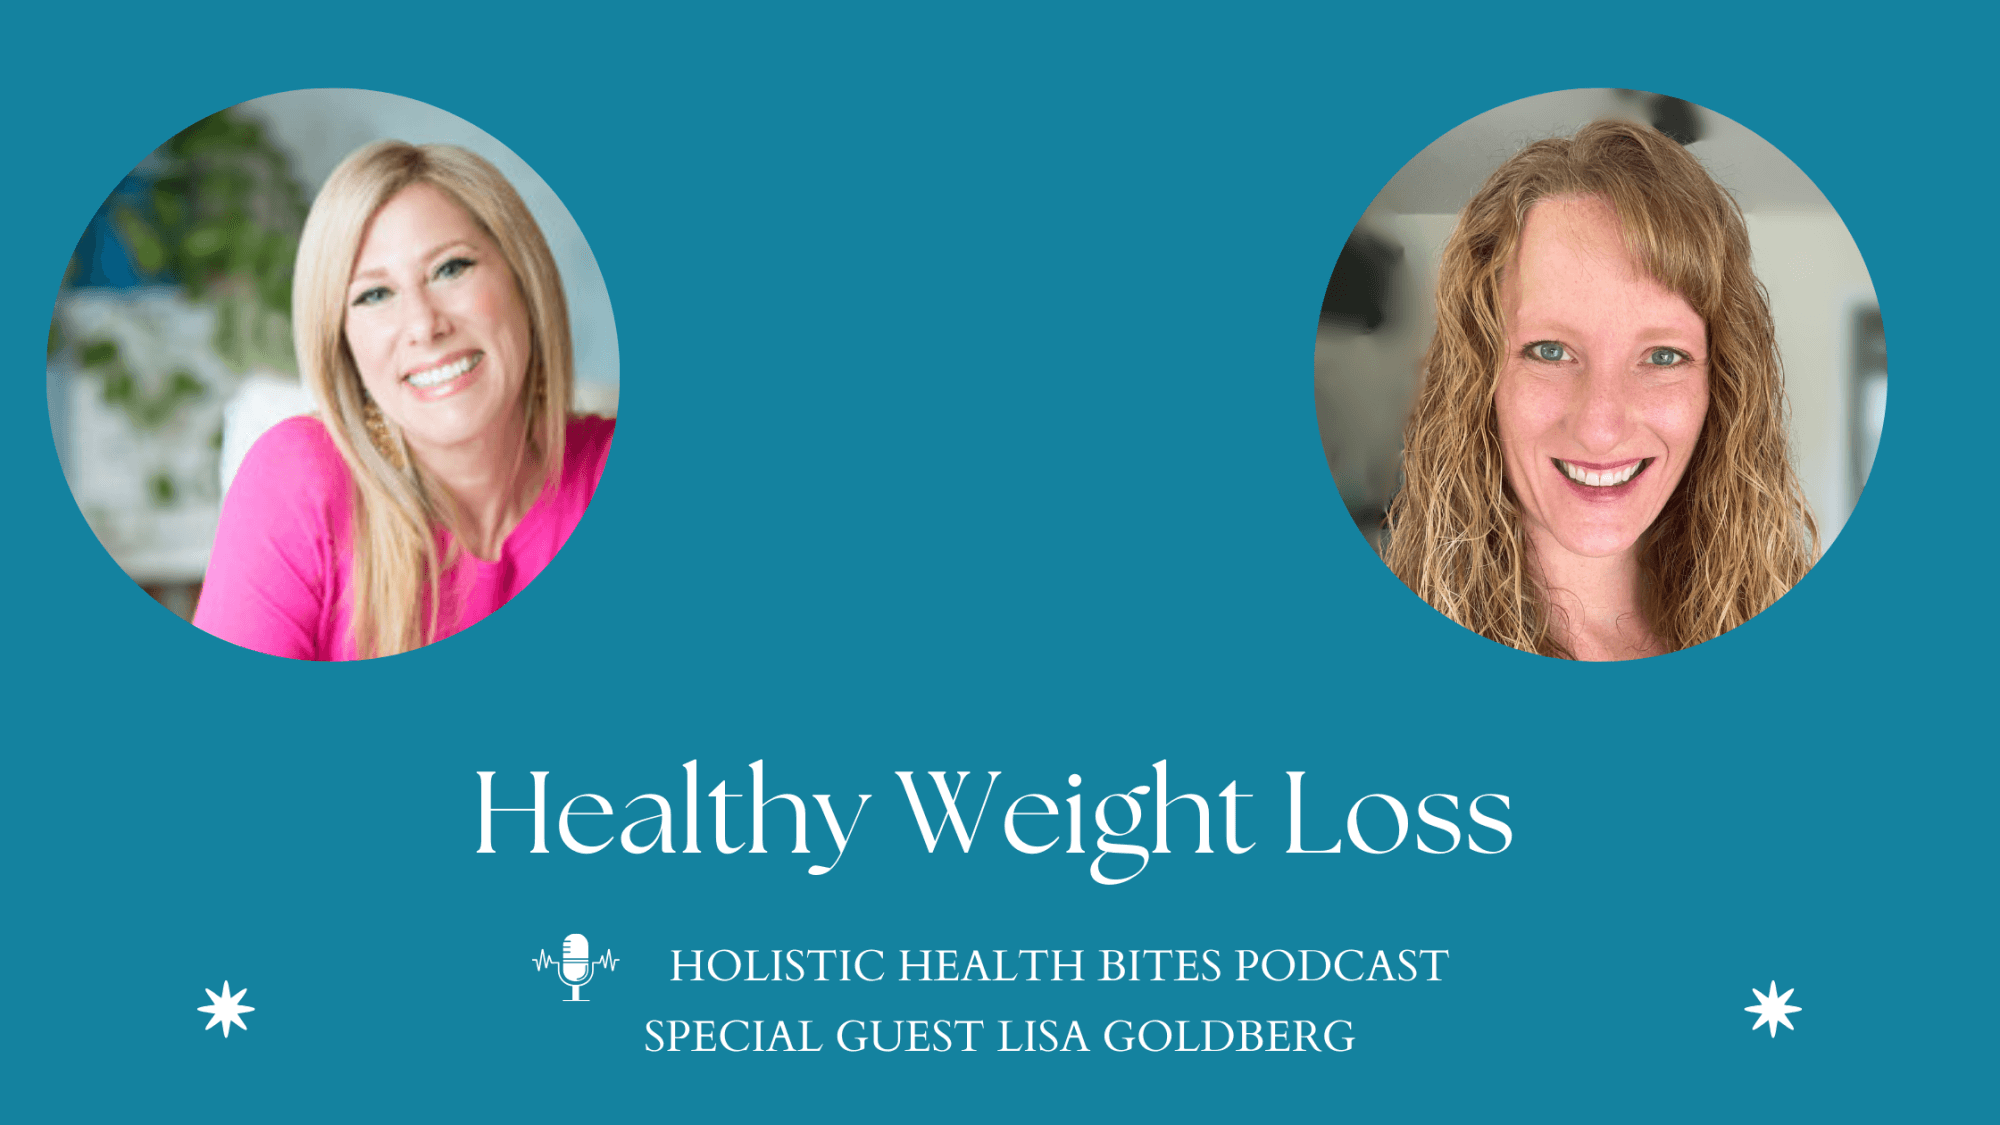 Stop Yo-Yo Dieting with Lisa Goldberg; a Holistic Health Bites podcast interview by Functional Nutritionist Andrea NIcholson